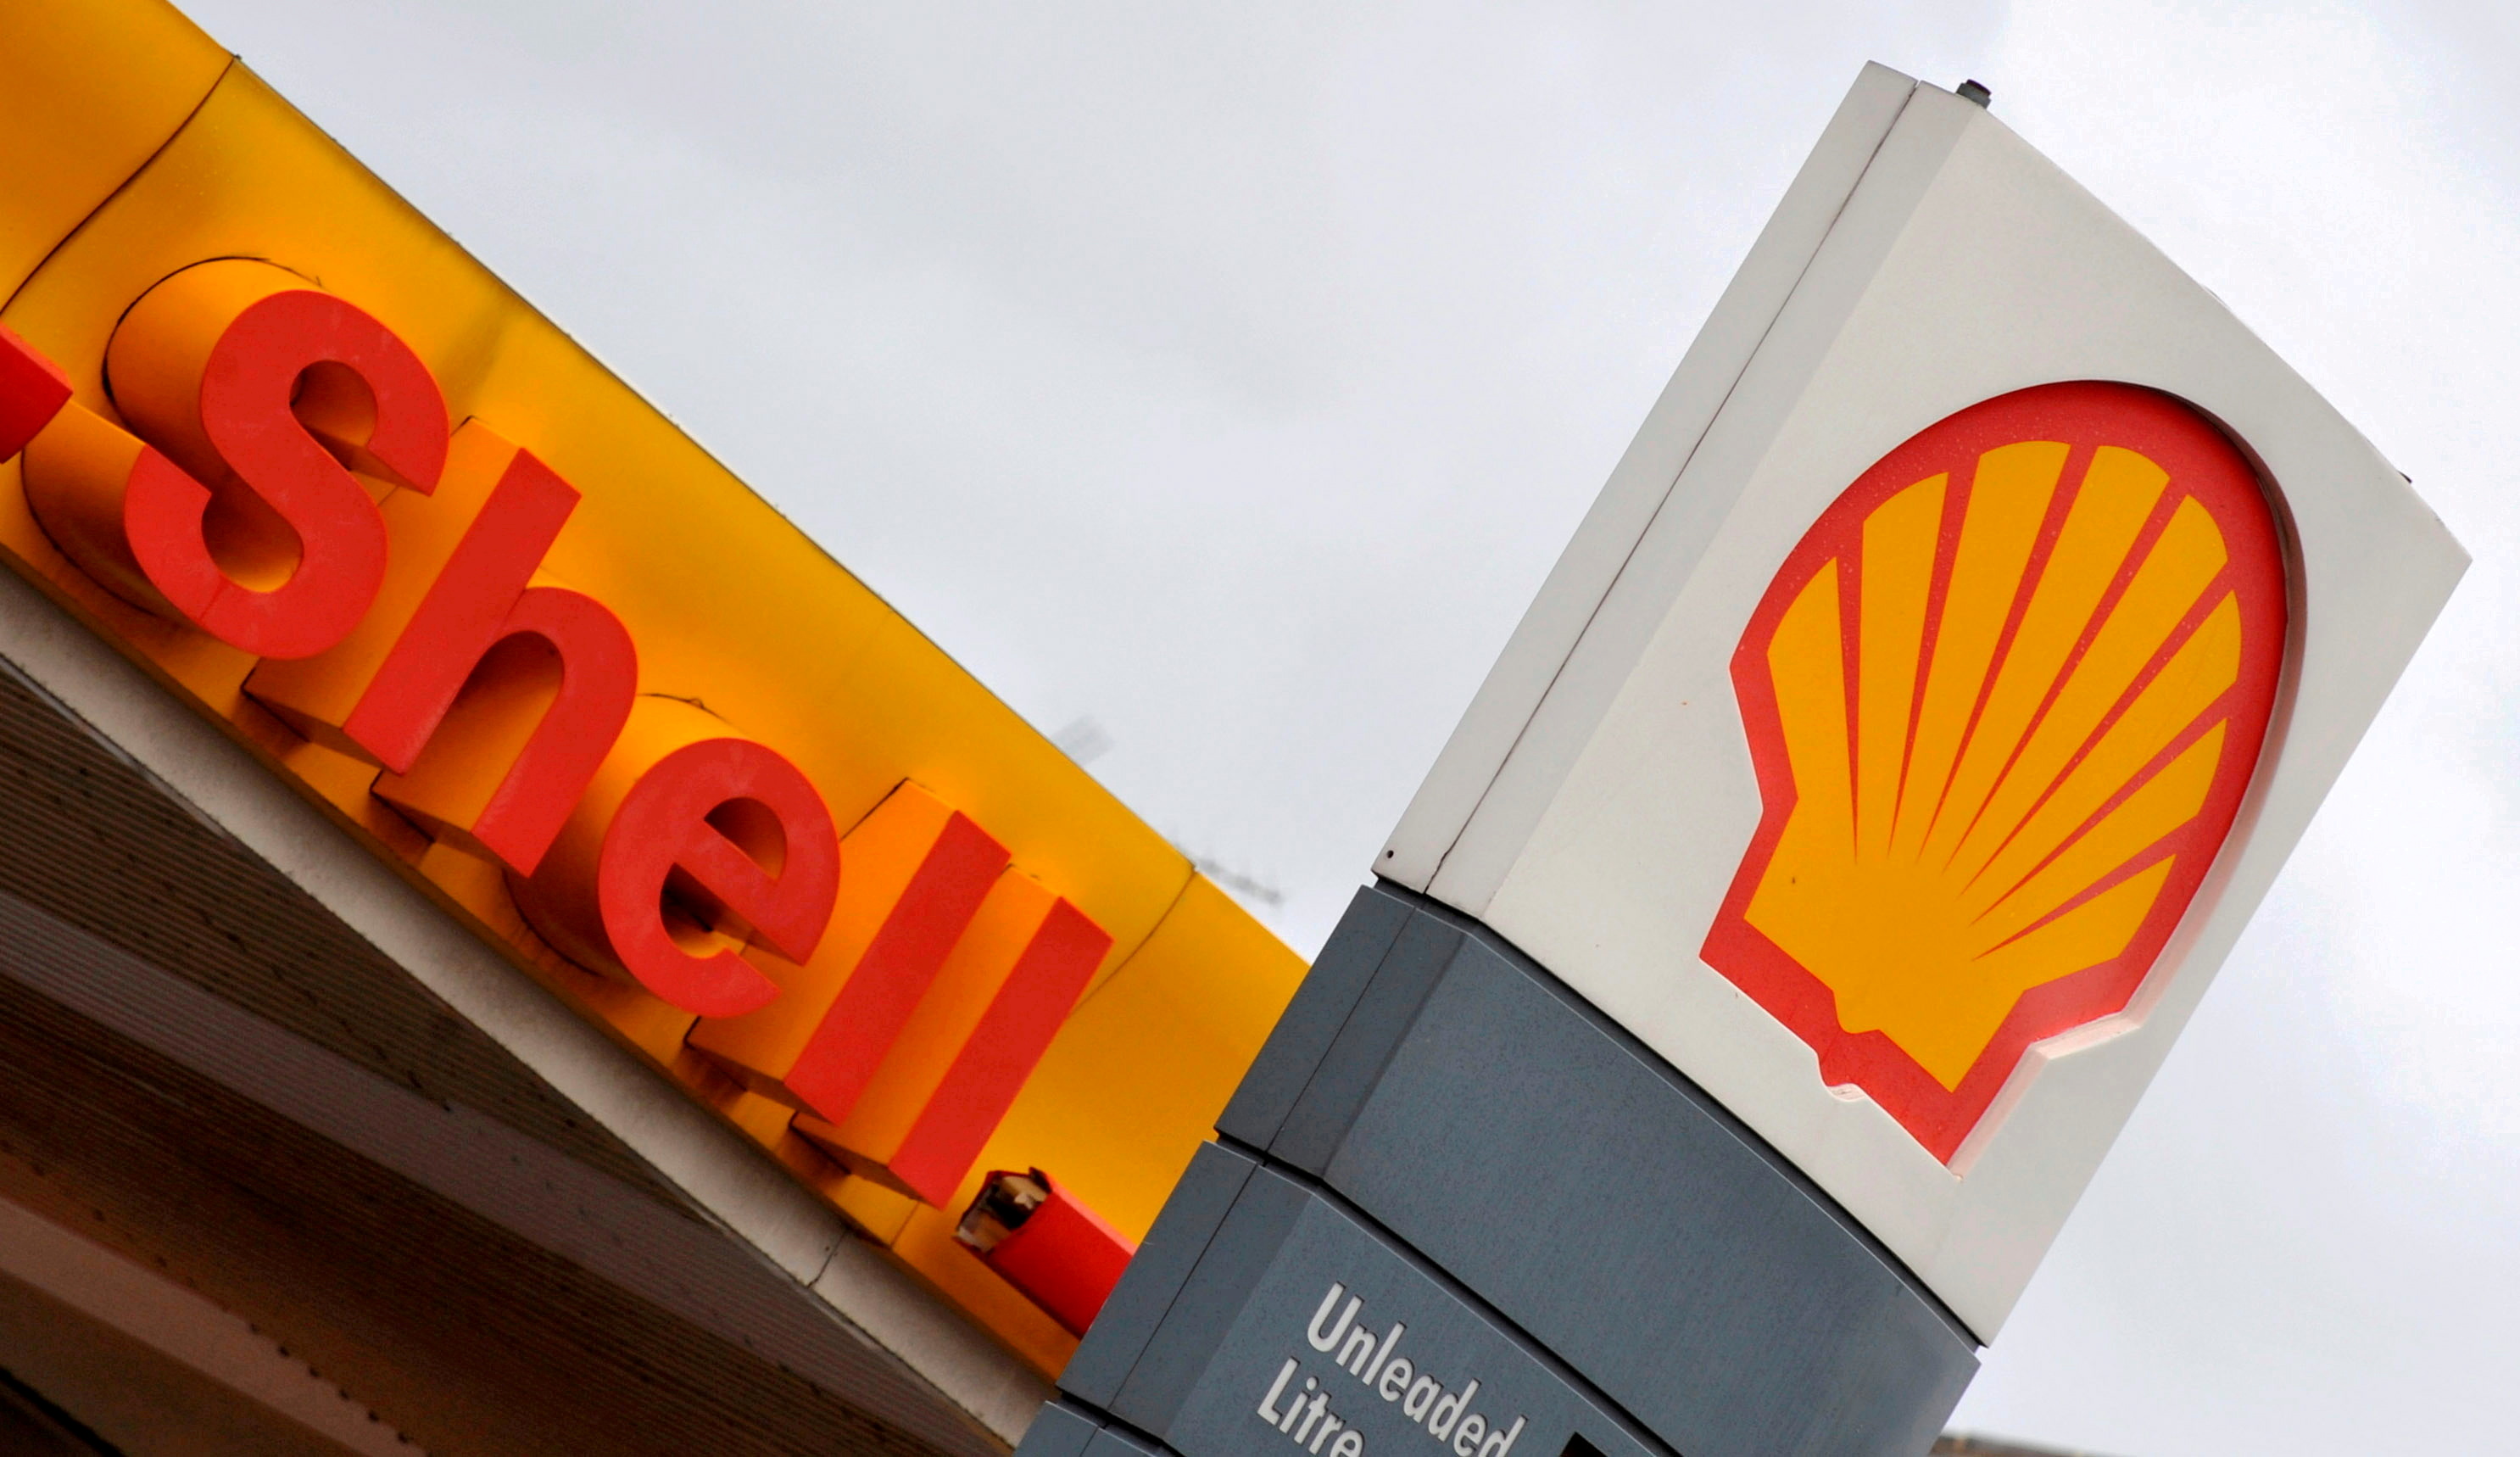 The Royal Dutch Shell logo is seen at a Shell petrol station in London, Britain